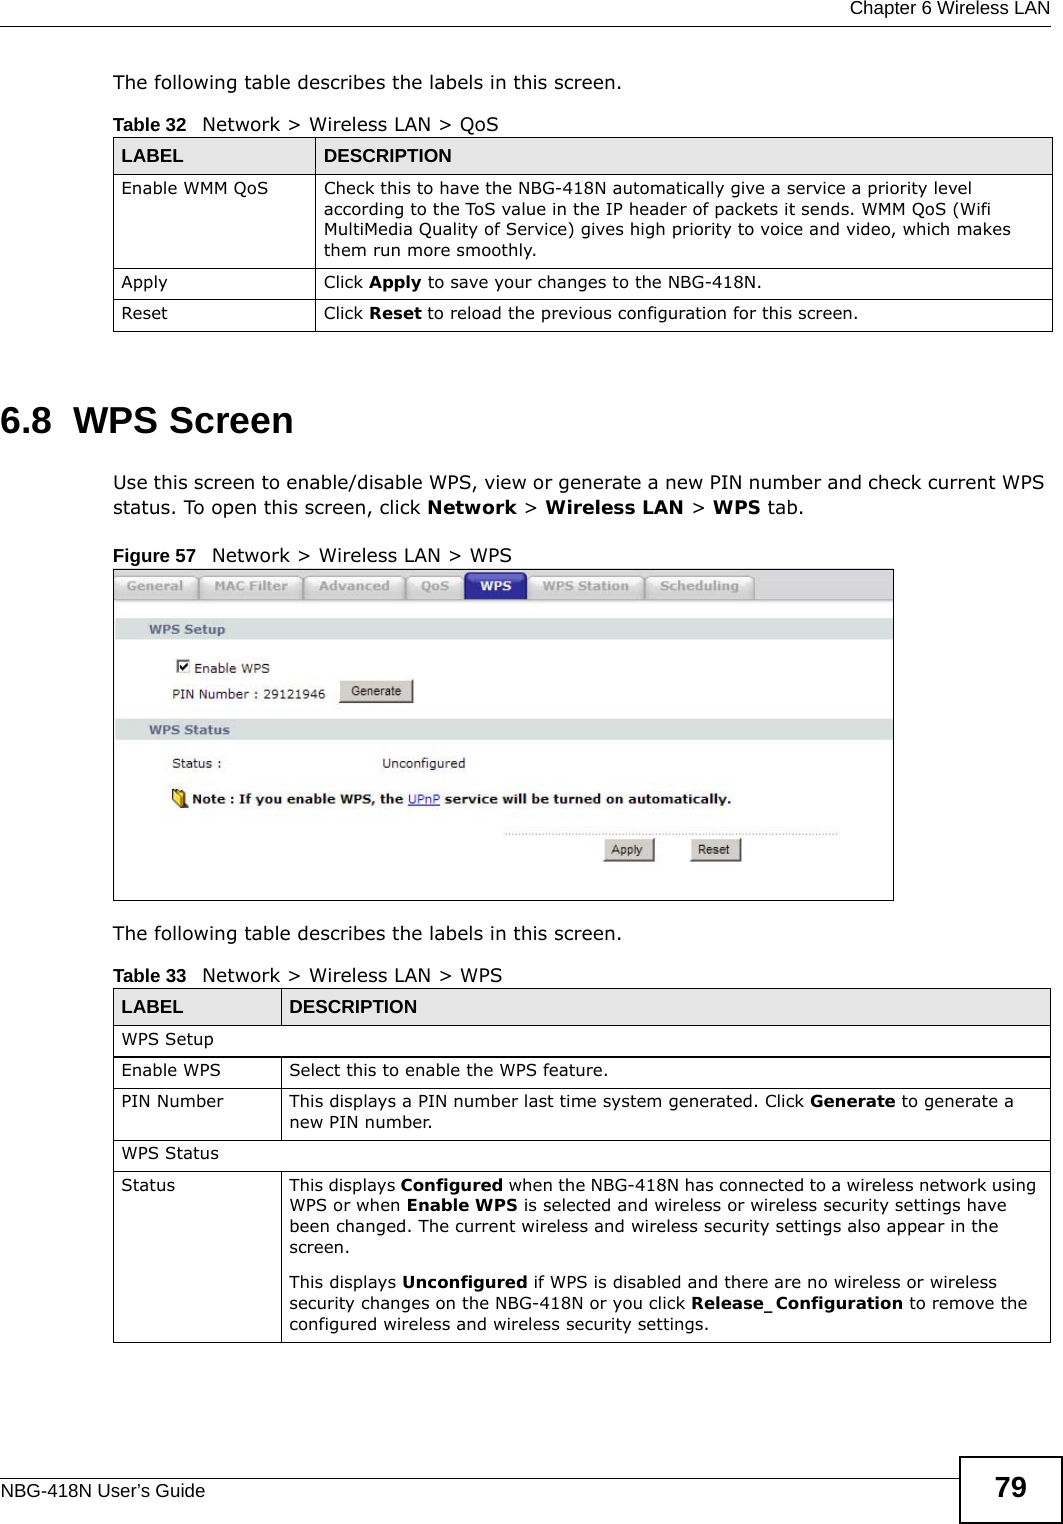  Chapter 6 Wireless LANNBG-418N User’s Guide 79The following table describes the labels in this screen. 6.8  WPS ScreenUse this screen to enable/disable WPS, view or generate a new PIN number and check current WPS status. To open this screen, click Network &gt; Wireless LAN &gt; WPS tab.Figure 57   Network &gt; Wireless LAN &gt; WPSThe following table describes the labels in this screen.Table 32   Network &gt; Wireless LAN &gt; QoSLABEL DESCRIPTIONEnable WMM QoS Check this to have the NBG-418N automatically give a service a priority level according to the ToS value in the IP header of packets it sends. WMM QoS (Wifi MultiMedia Quality of Service) gives high priority to voice and video, which makes them run more smoothly.Apply Click Apply to save your changes to the NBG-418N.Reset Click Reset to reload the previous configuration for this screen.Table 33   Network &gt; Wireless LAN &gt; WPSLABEL DESCRIPTIONWPS SetupEnable WPS Select this to enable the WPS feature.PIN Number This displays a PIN number last time system generated. Click Generate to generate a new PIN number.WPS StatusStatus This displays Configured when the NBG-418N has connected to a wireless network using WPS or when Enable WPS is selected and wireless or wireless security settings have been changed. The current wireless and wireless security settings also appear in the screen.This displays Unconfigured if WPS is disabled and there are no wireless or wireless security changes on the NBG-418N or you click Release_Configuration to remove the configured wireless and wireless security settings.